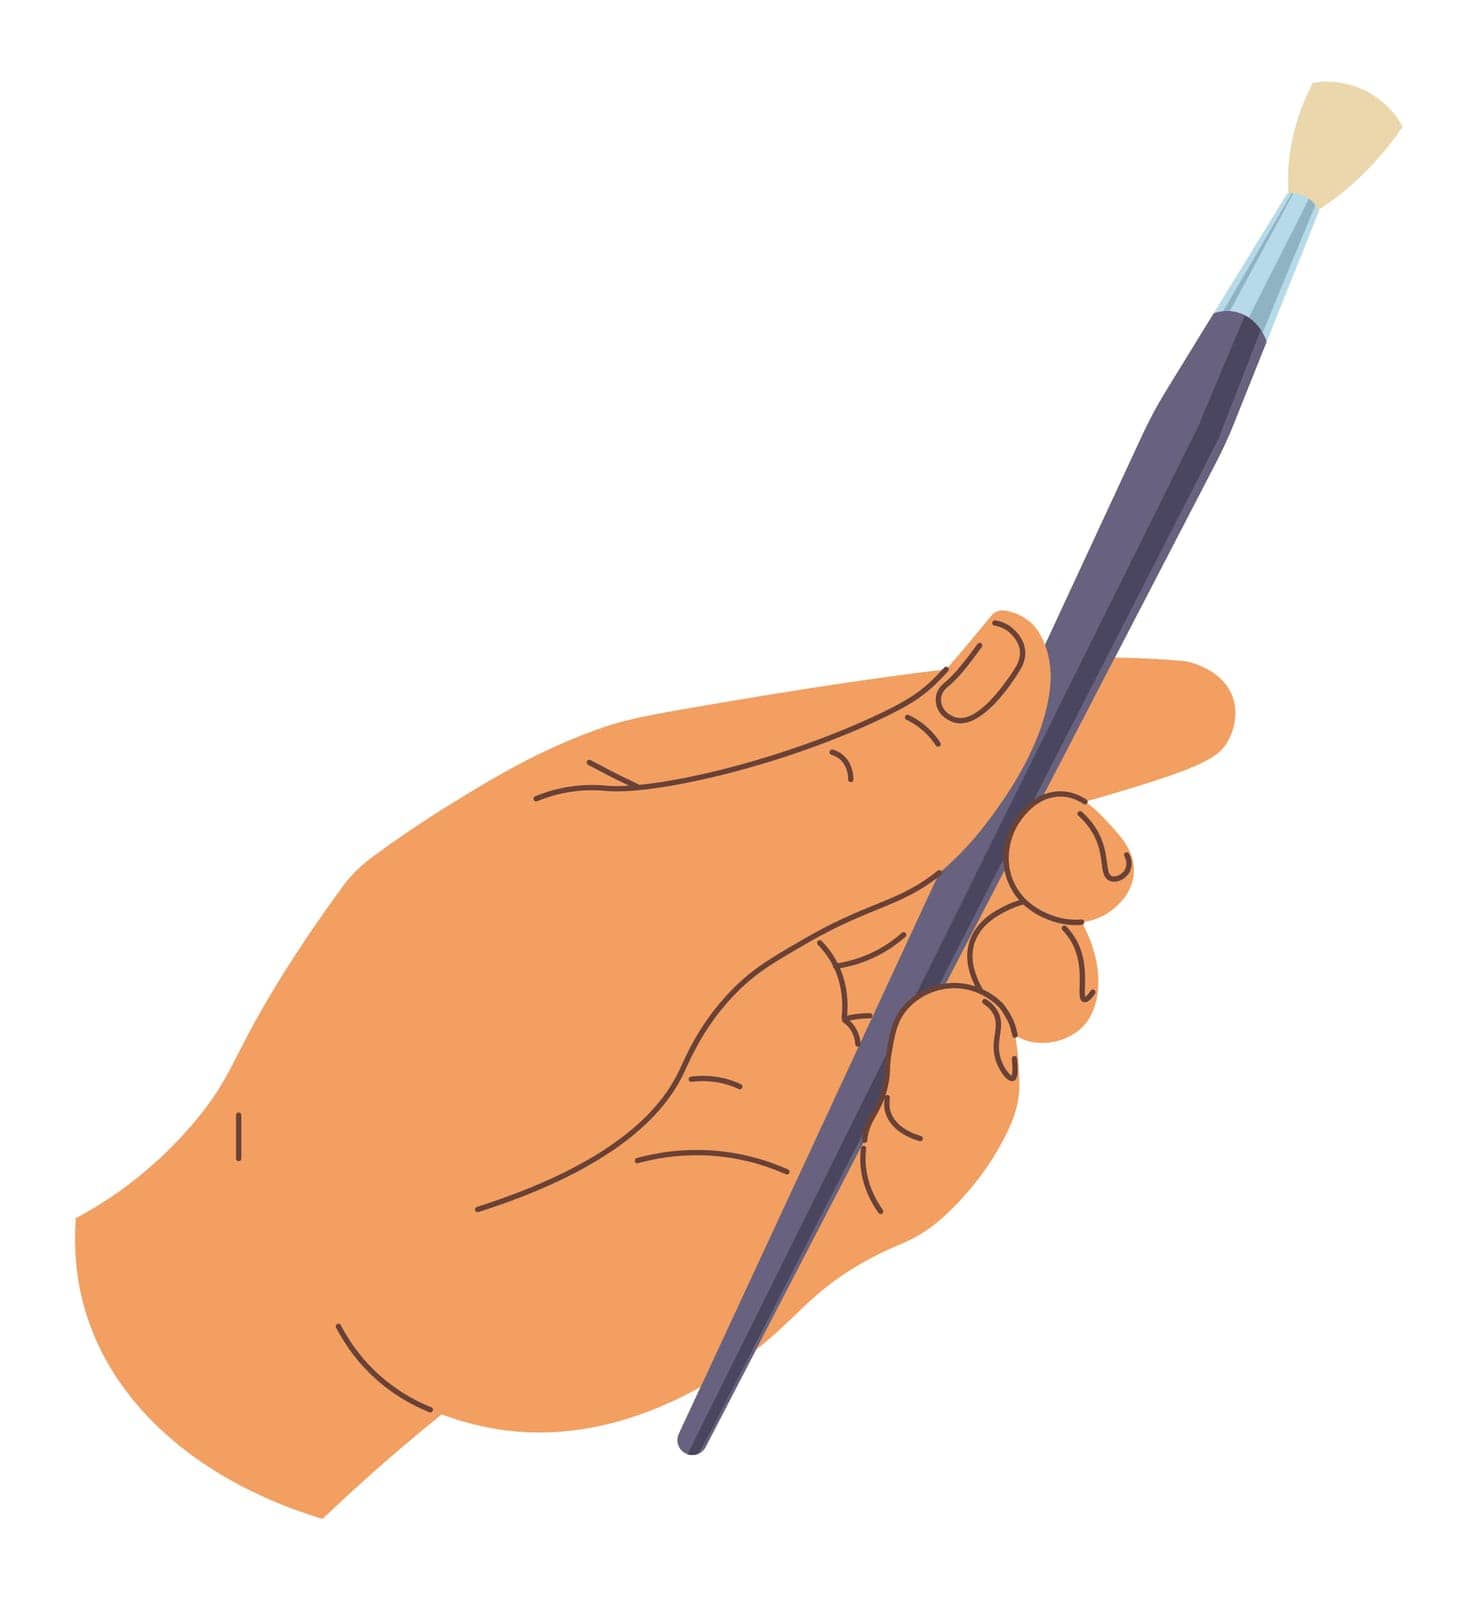 Hand holding paintbrush with bristle and handle by Sonulkaster